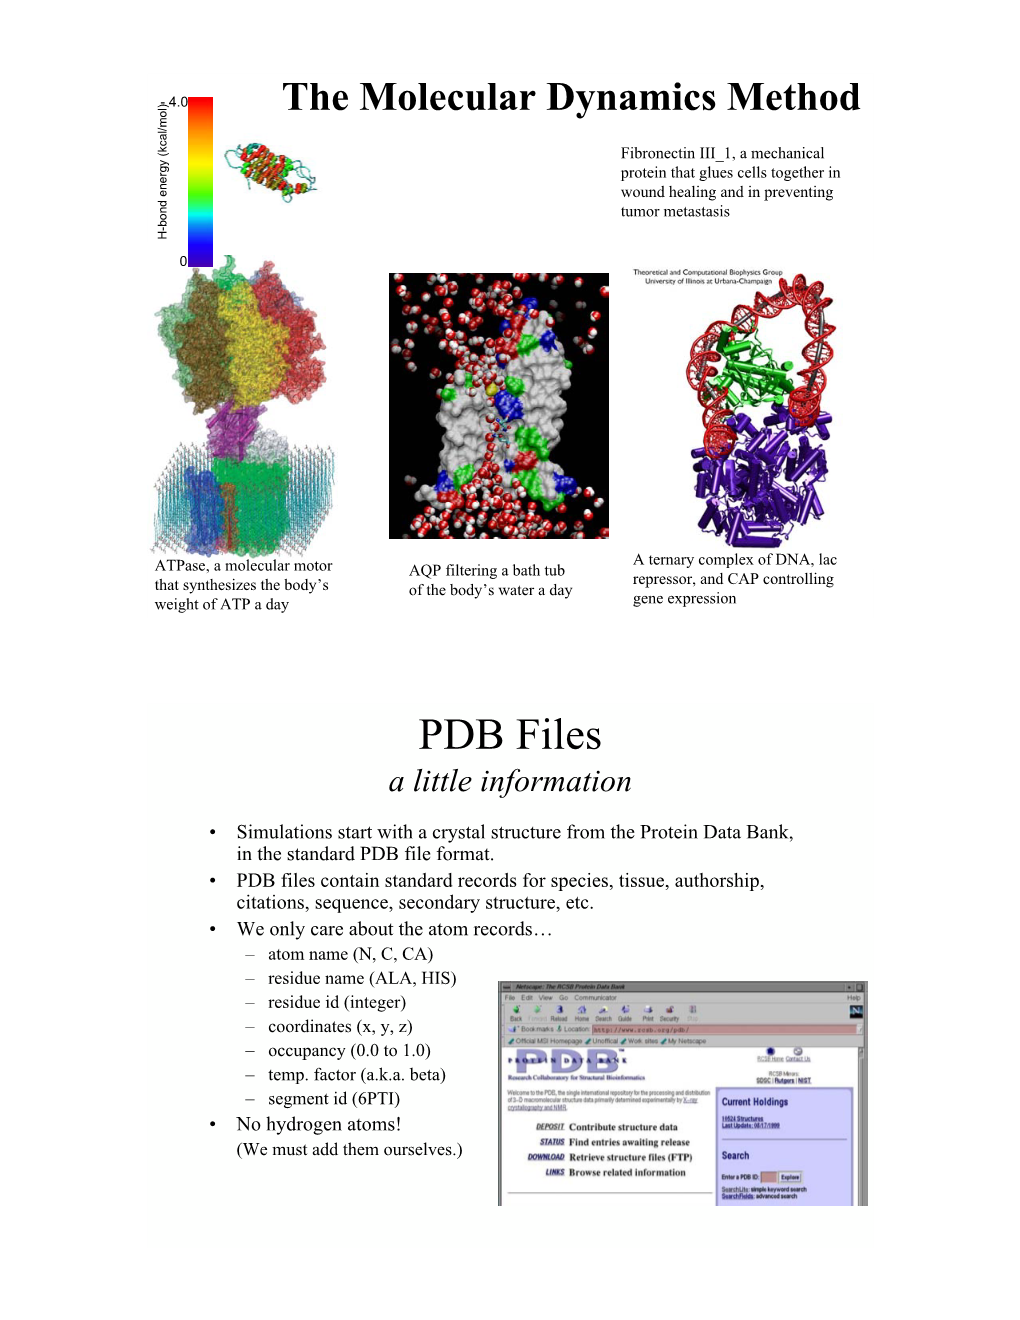 PDB Files a Little Information